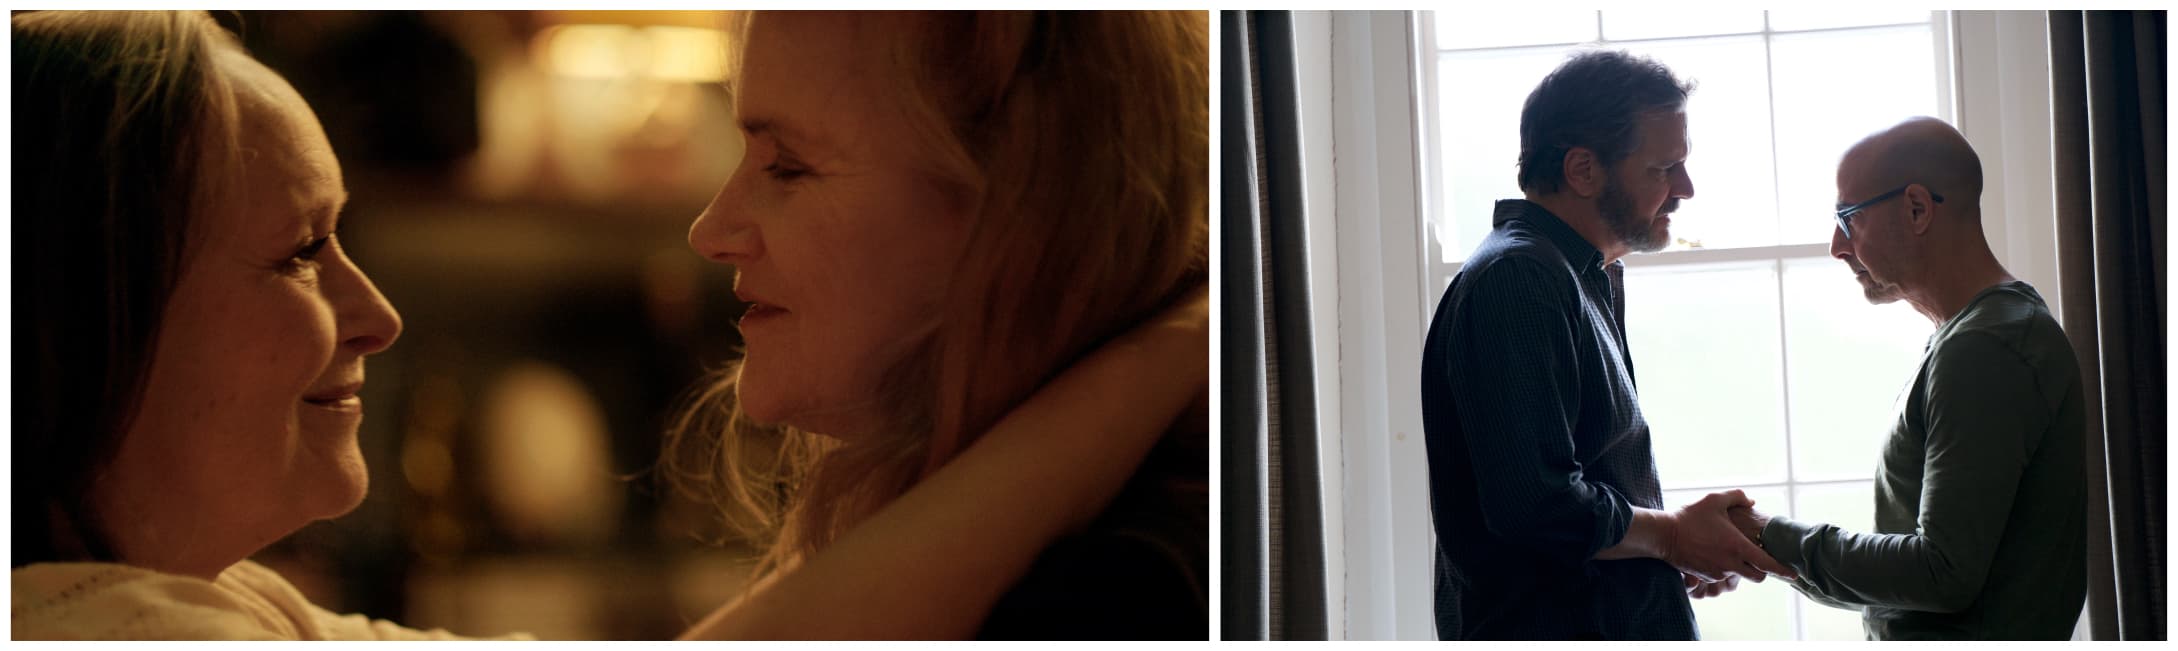 Left image: A still from &quot;Two of Us.&quot; (Courtesy Magnolia Pictures) Right image: A still from &quot;Supernova.&quot; (Courtesy Bleecker Street Media)